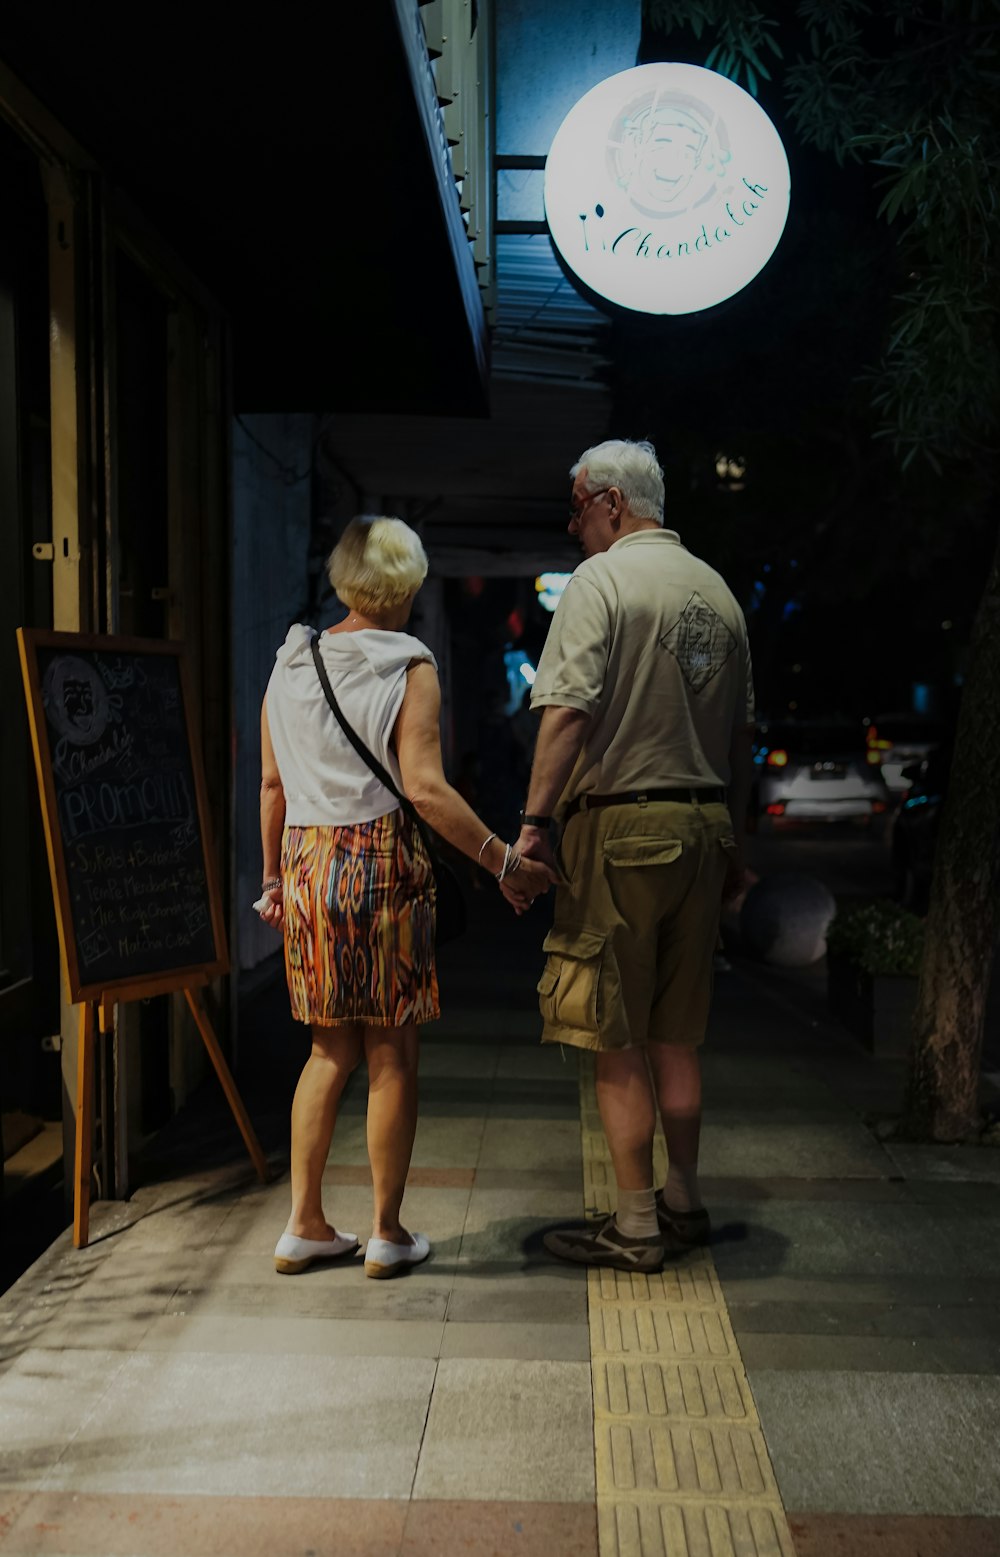 man and woman holding hands standing in front of sign